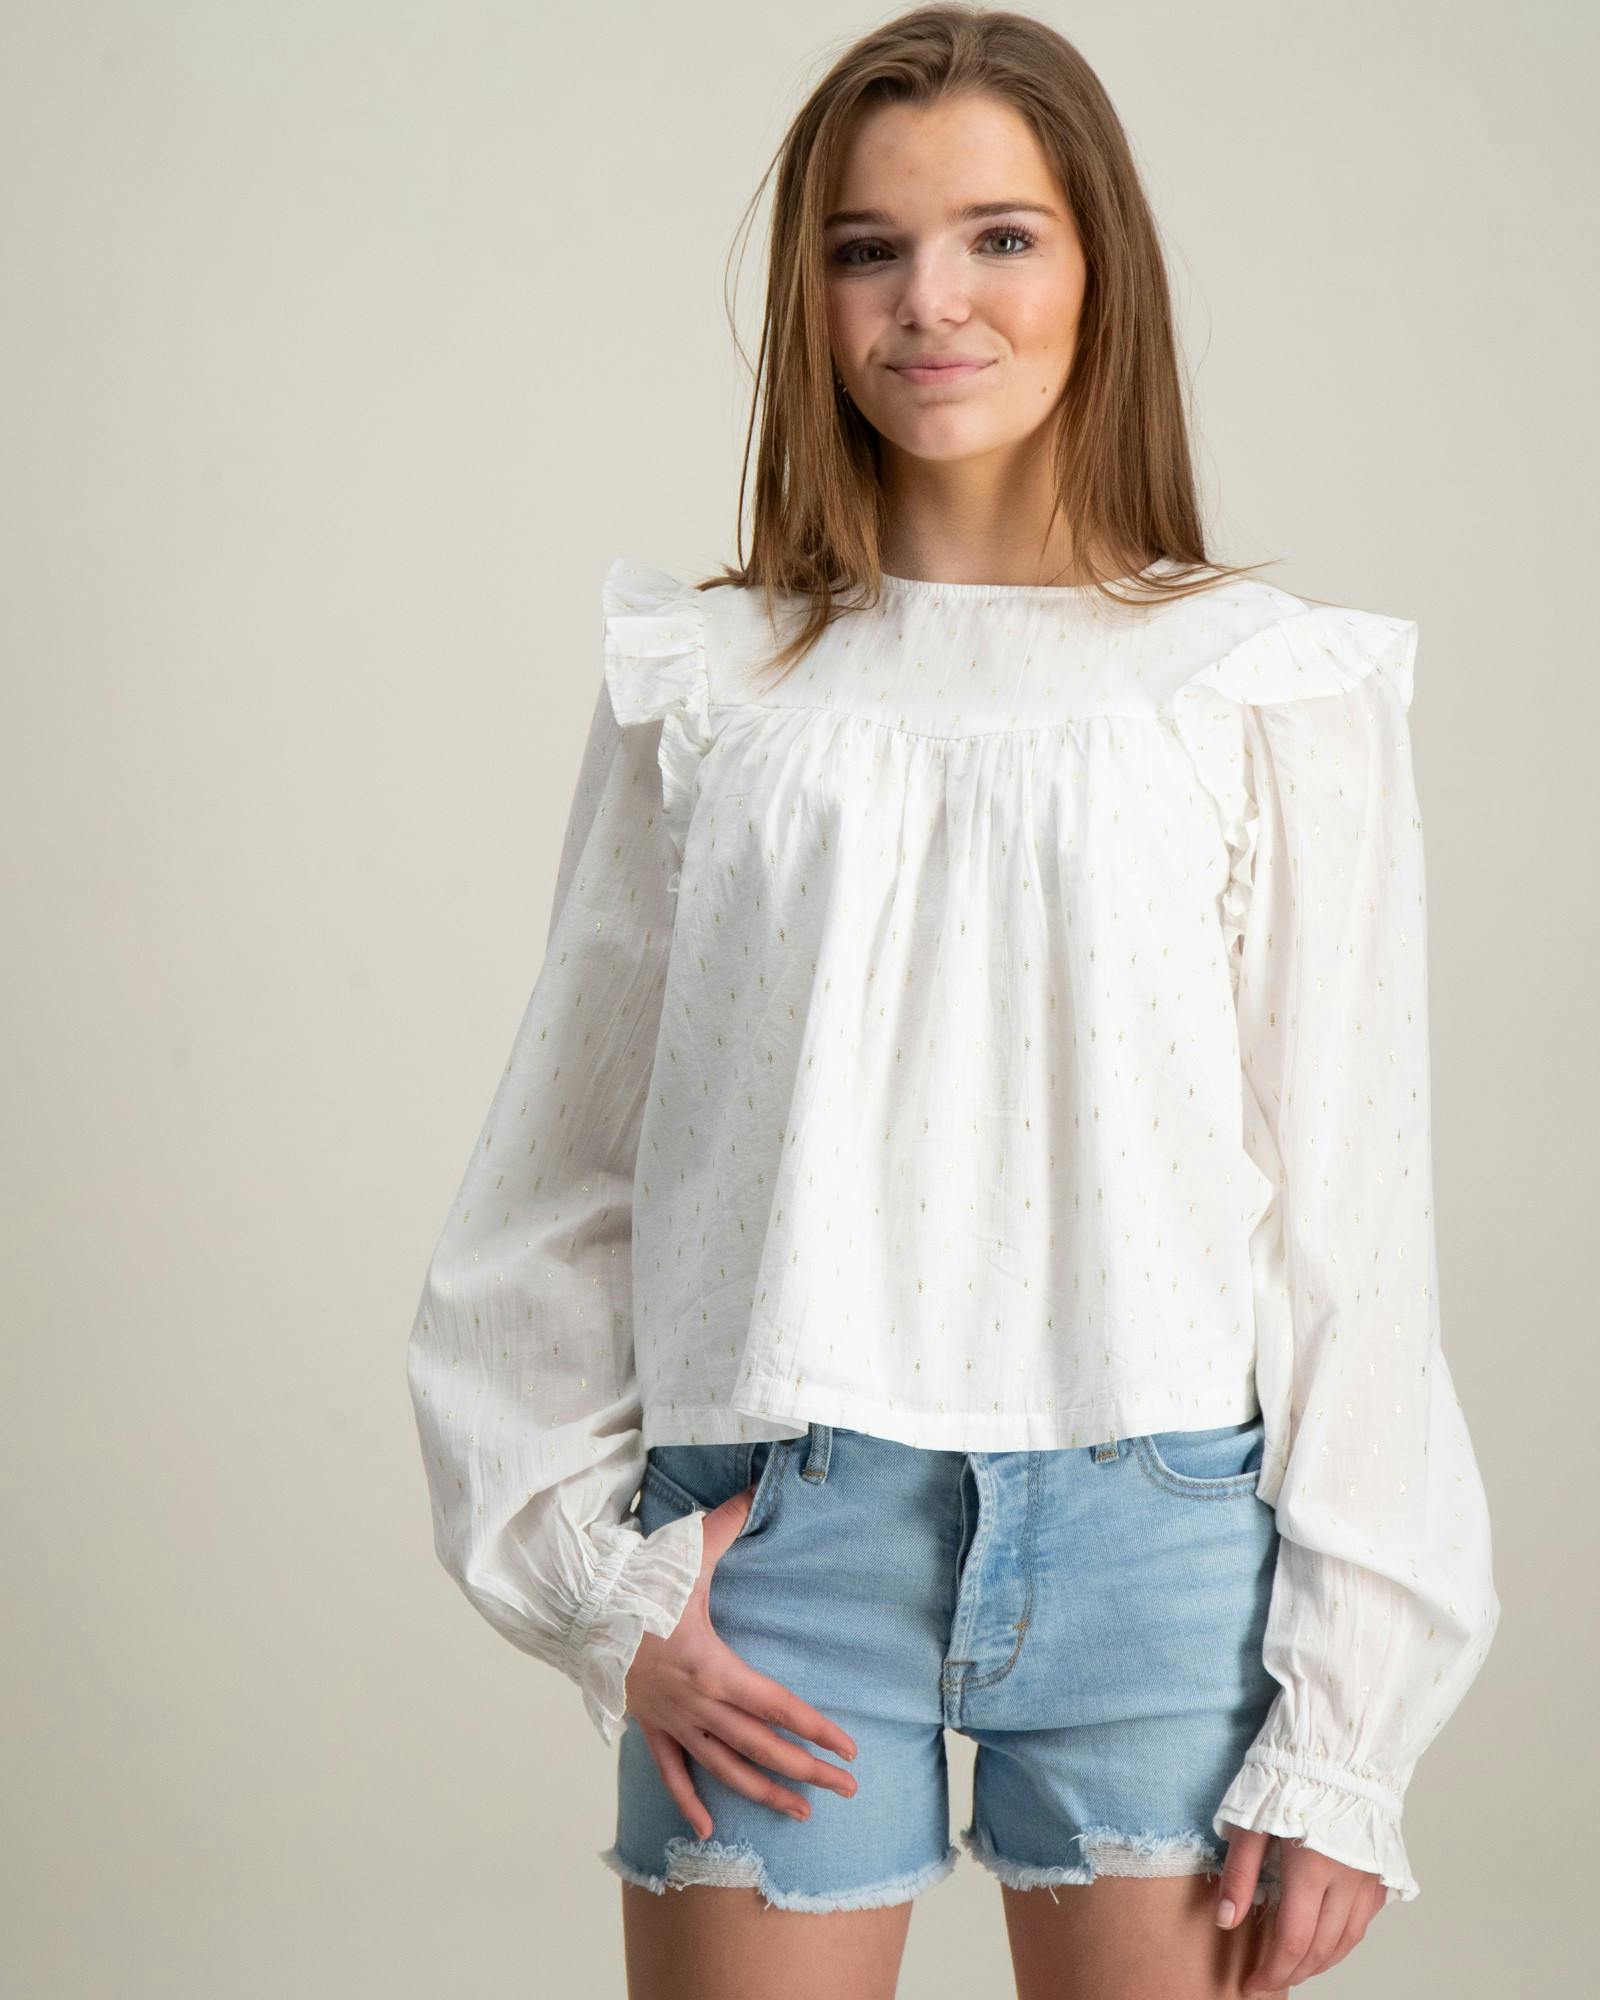 Y double frill blouse